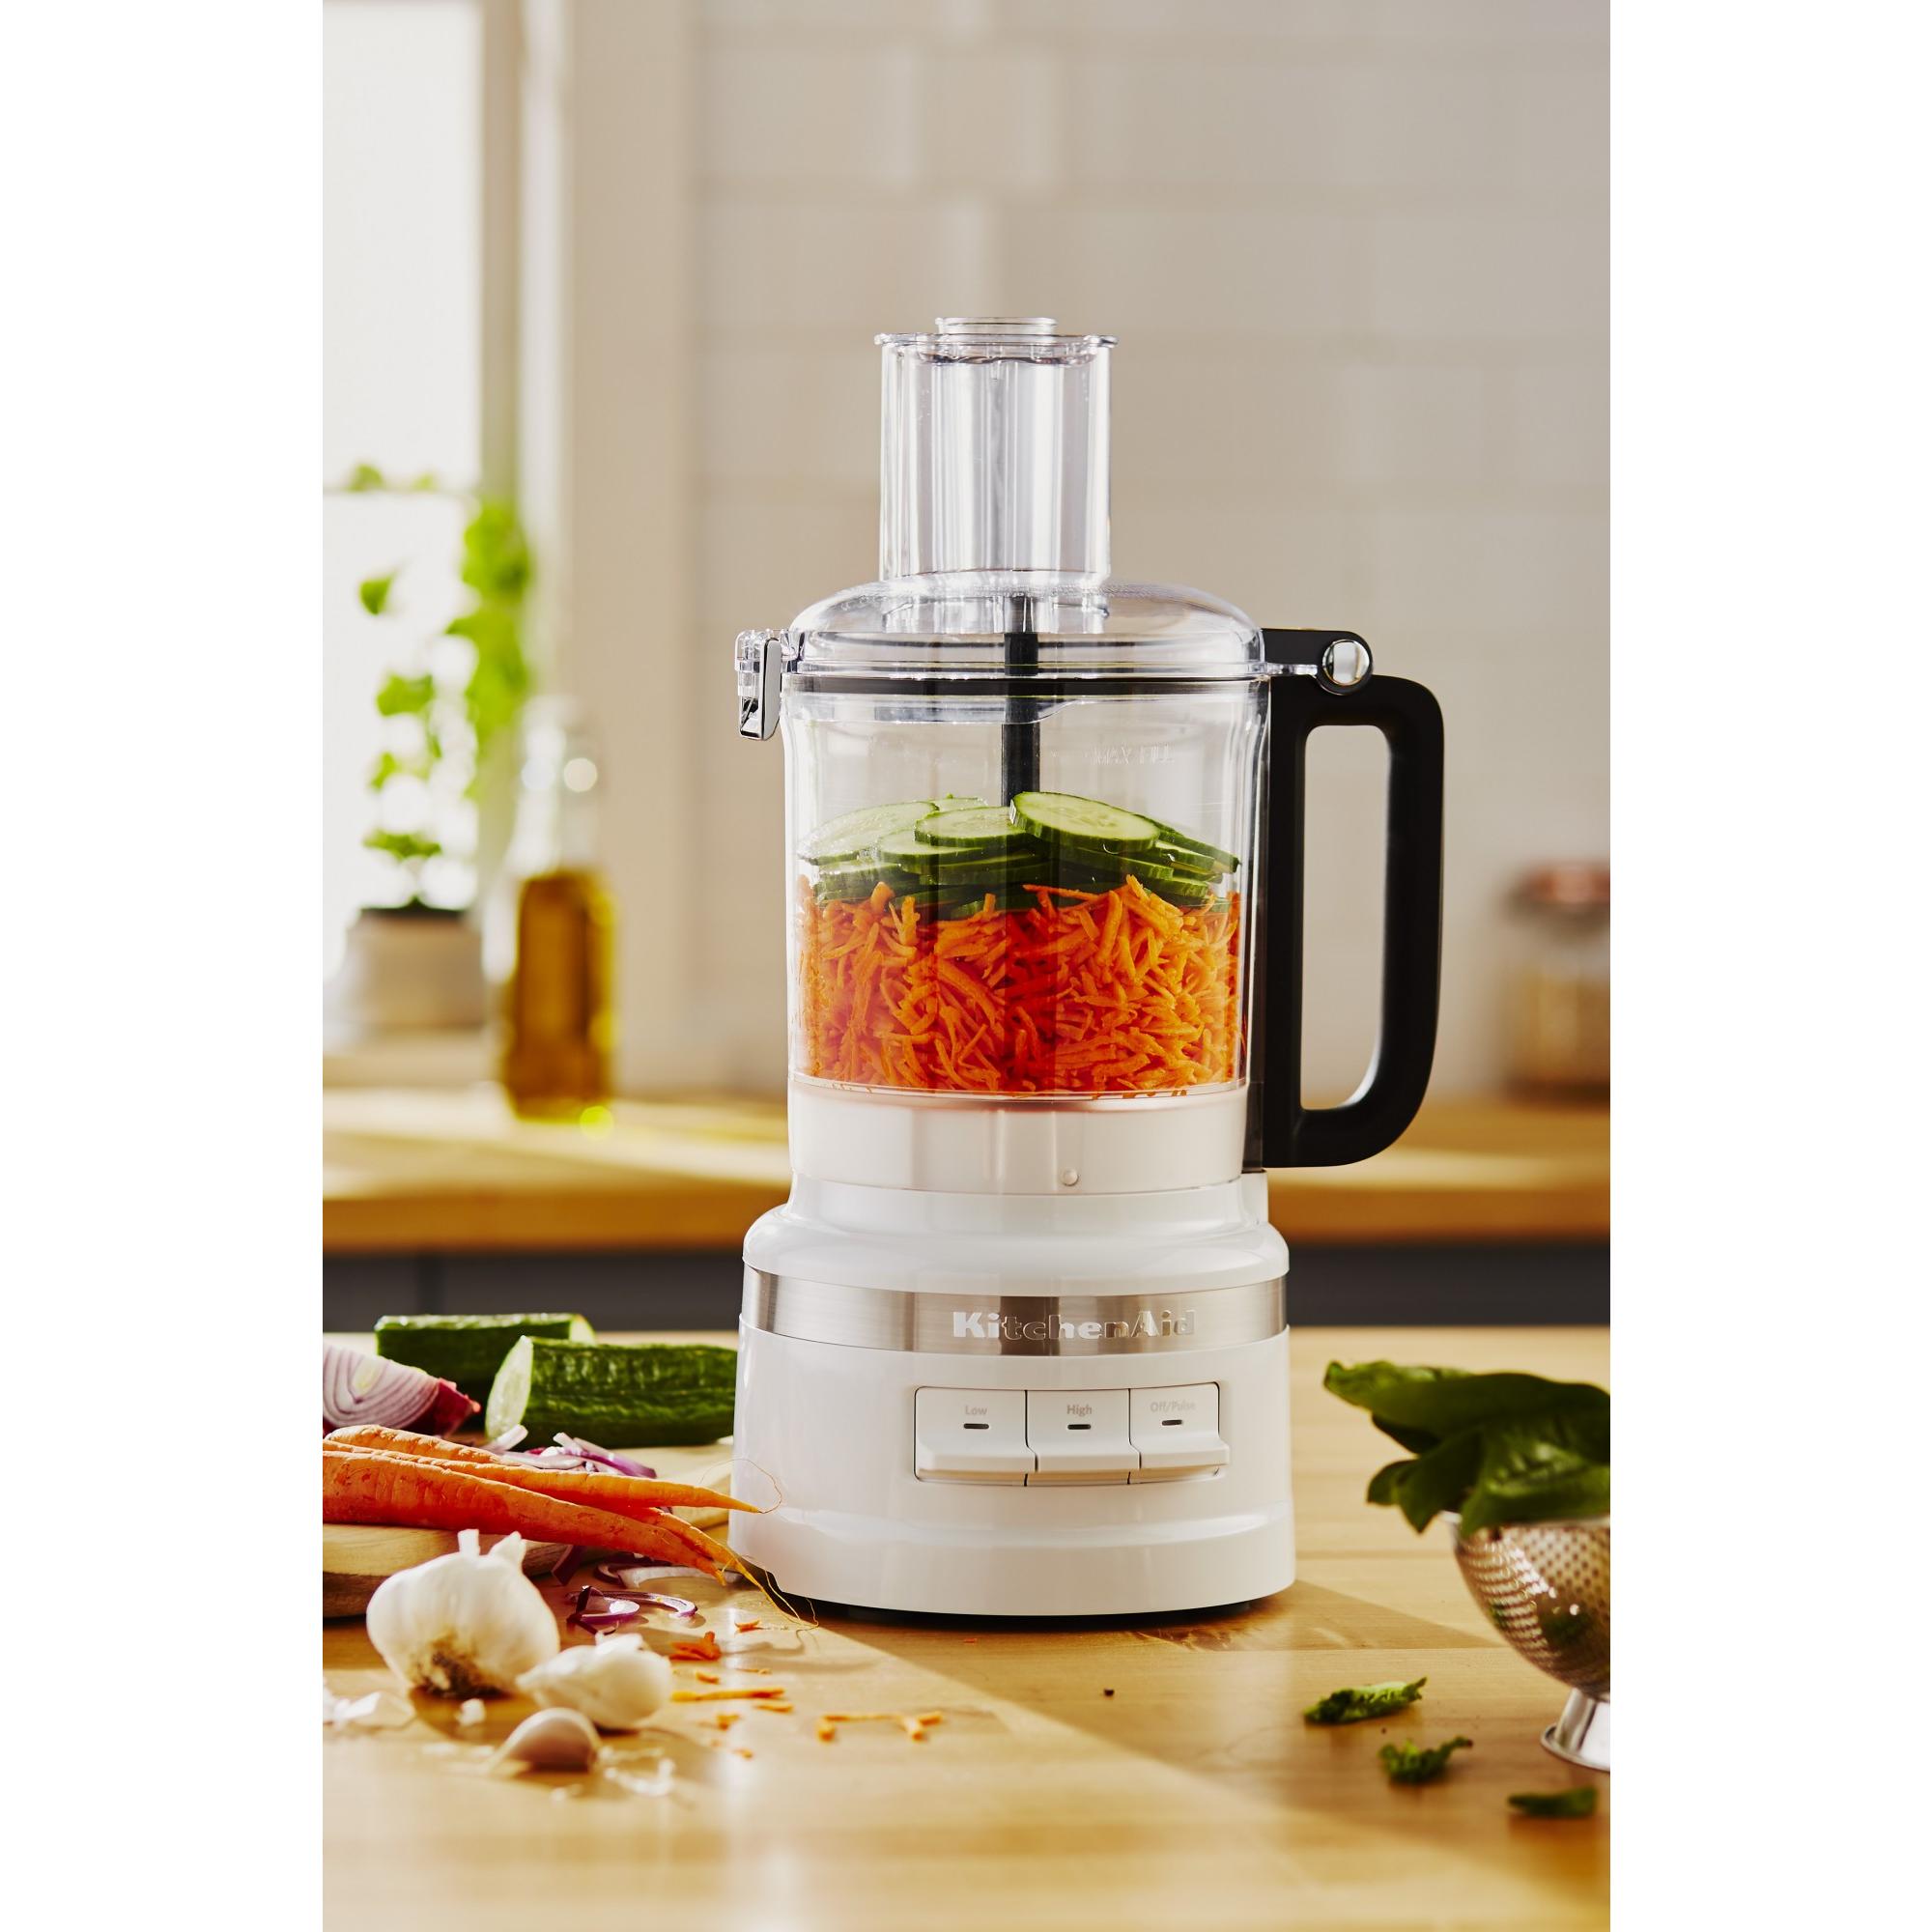 KitchenAid KFP0918WH 9 Cup Food Processor, White - image 5 of 7